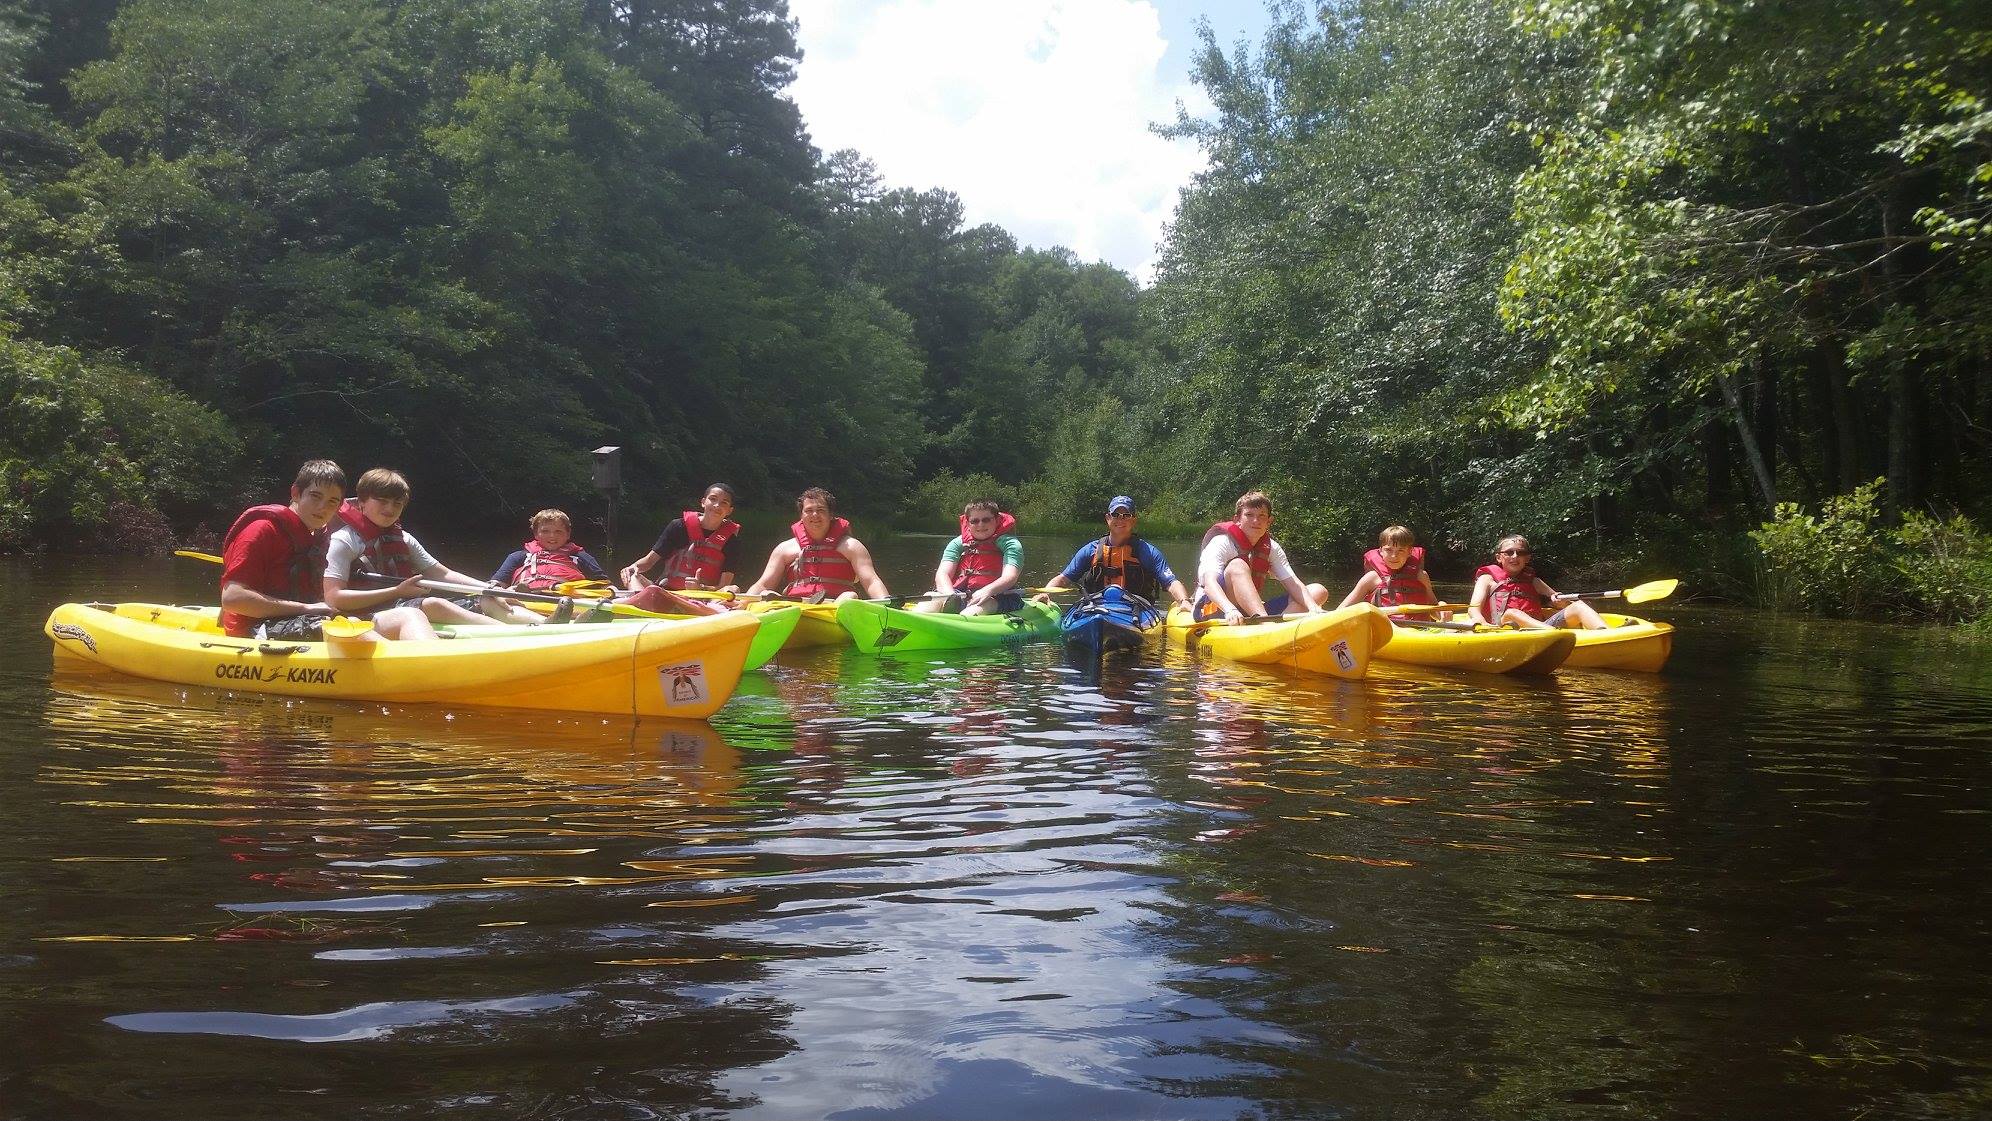 Adults with a group of kids kayaking down a river.